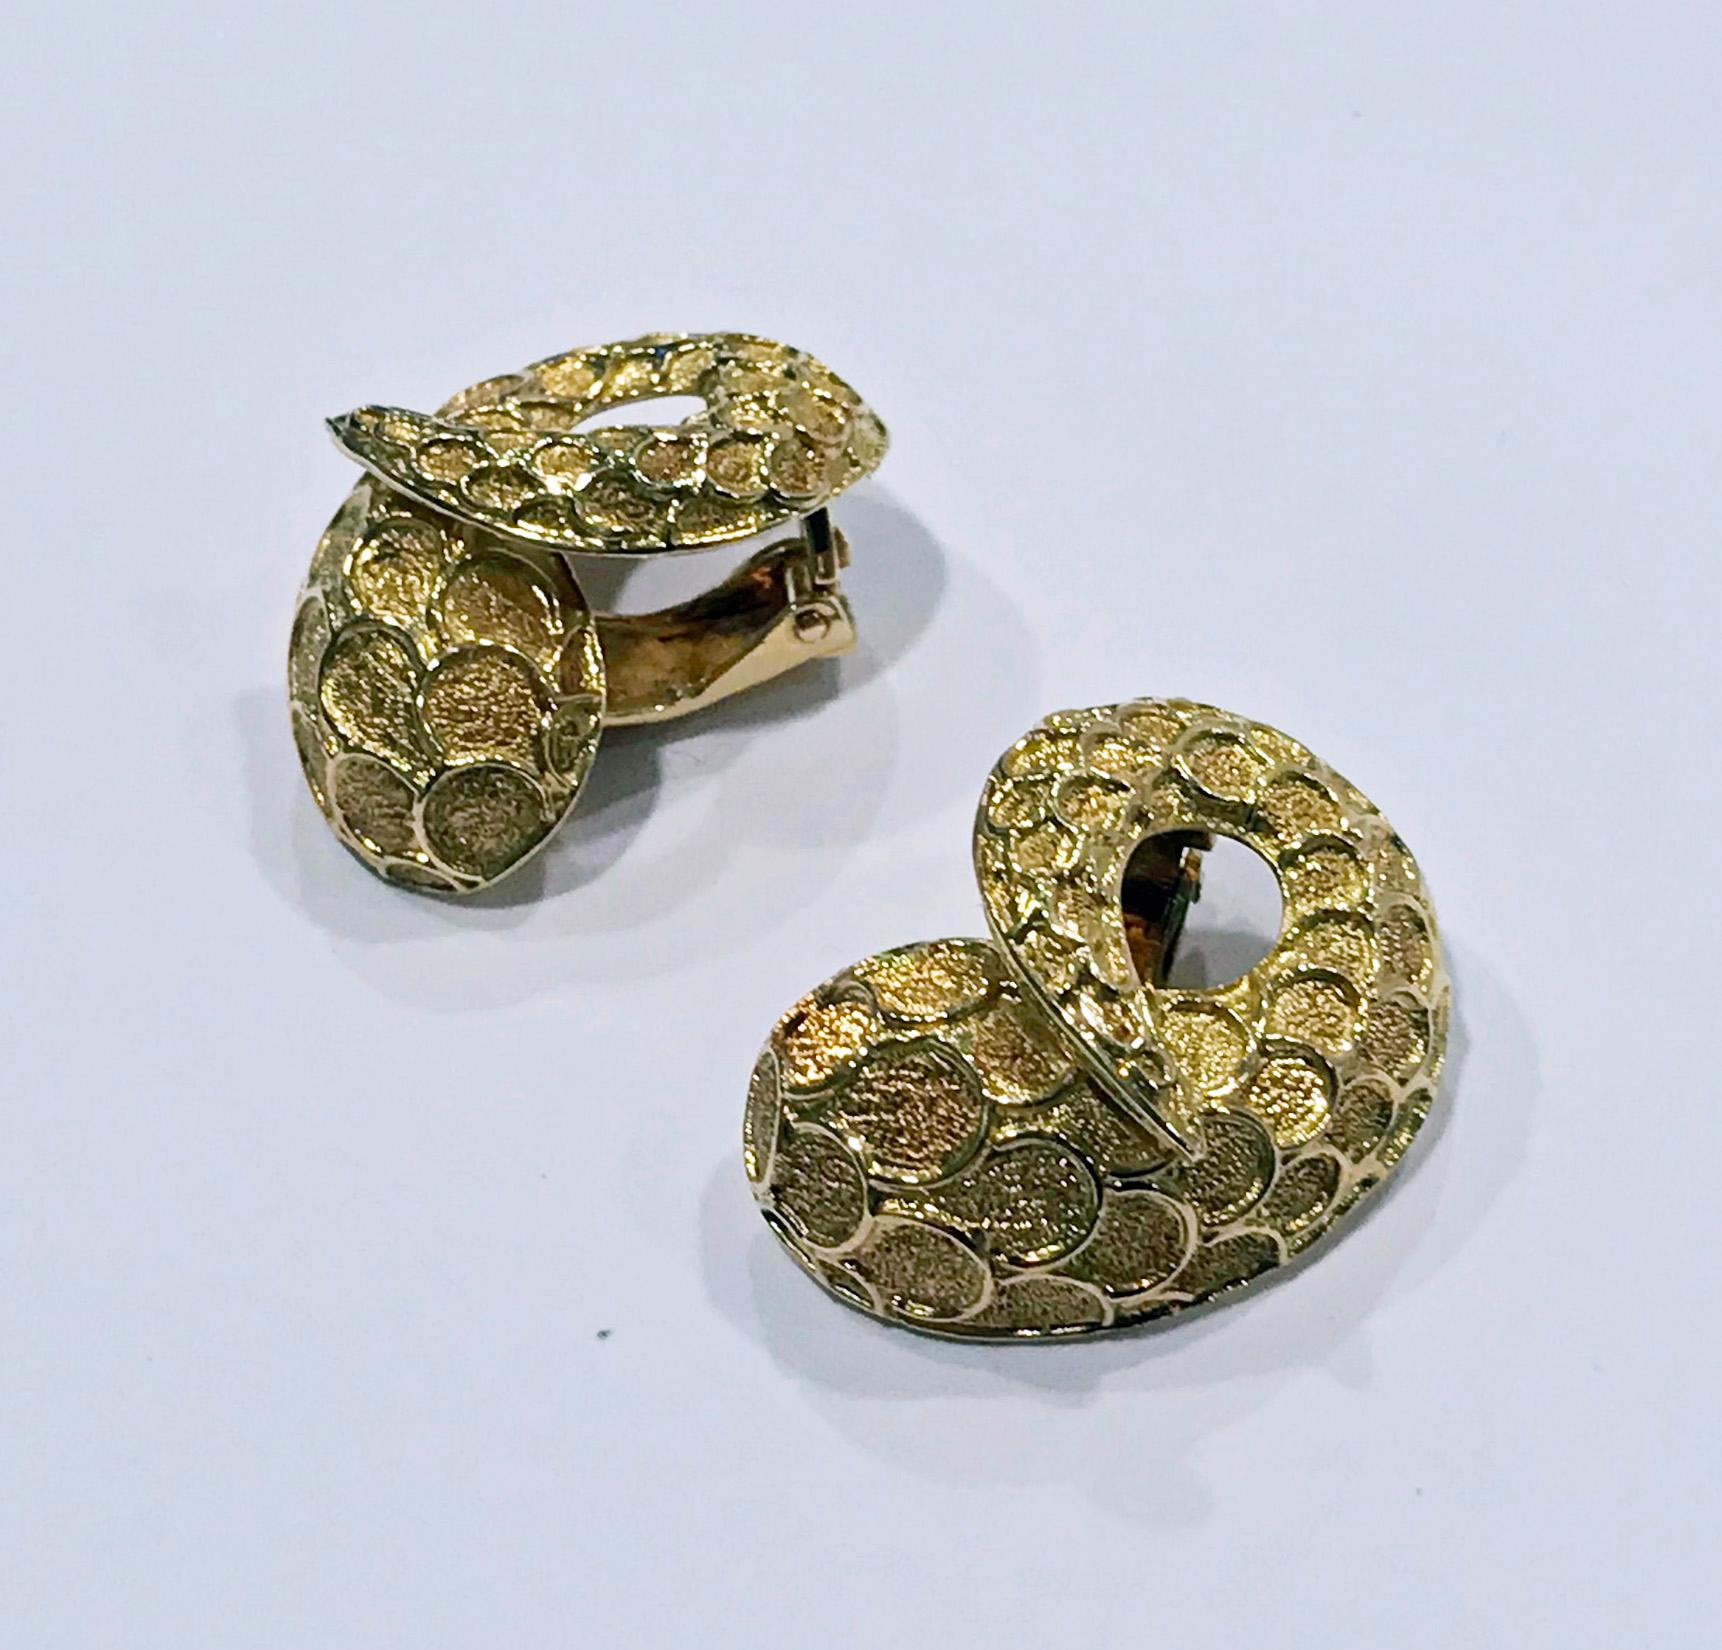 Lalaounis 18K Earrings coil serpent snake like textured, Greece C.1990. Ilias Lalaounis. Stamped Lalaounis A21 750. Measure: 2.50 x 1.50 cm. Total Item Weight: 13.20 grams. Clip backs.